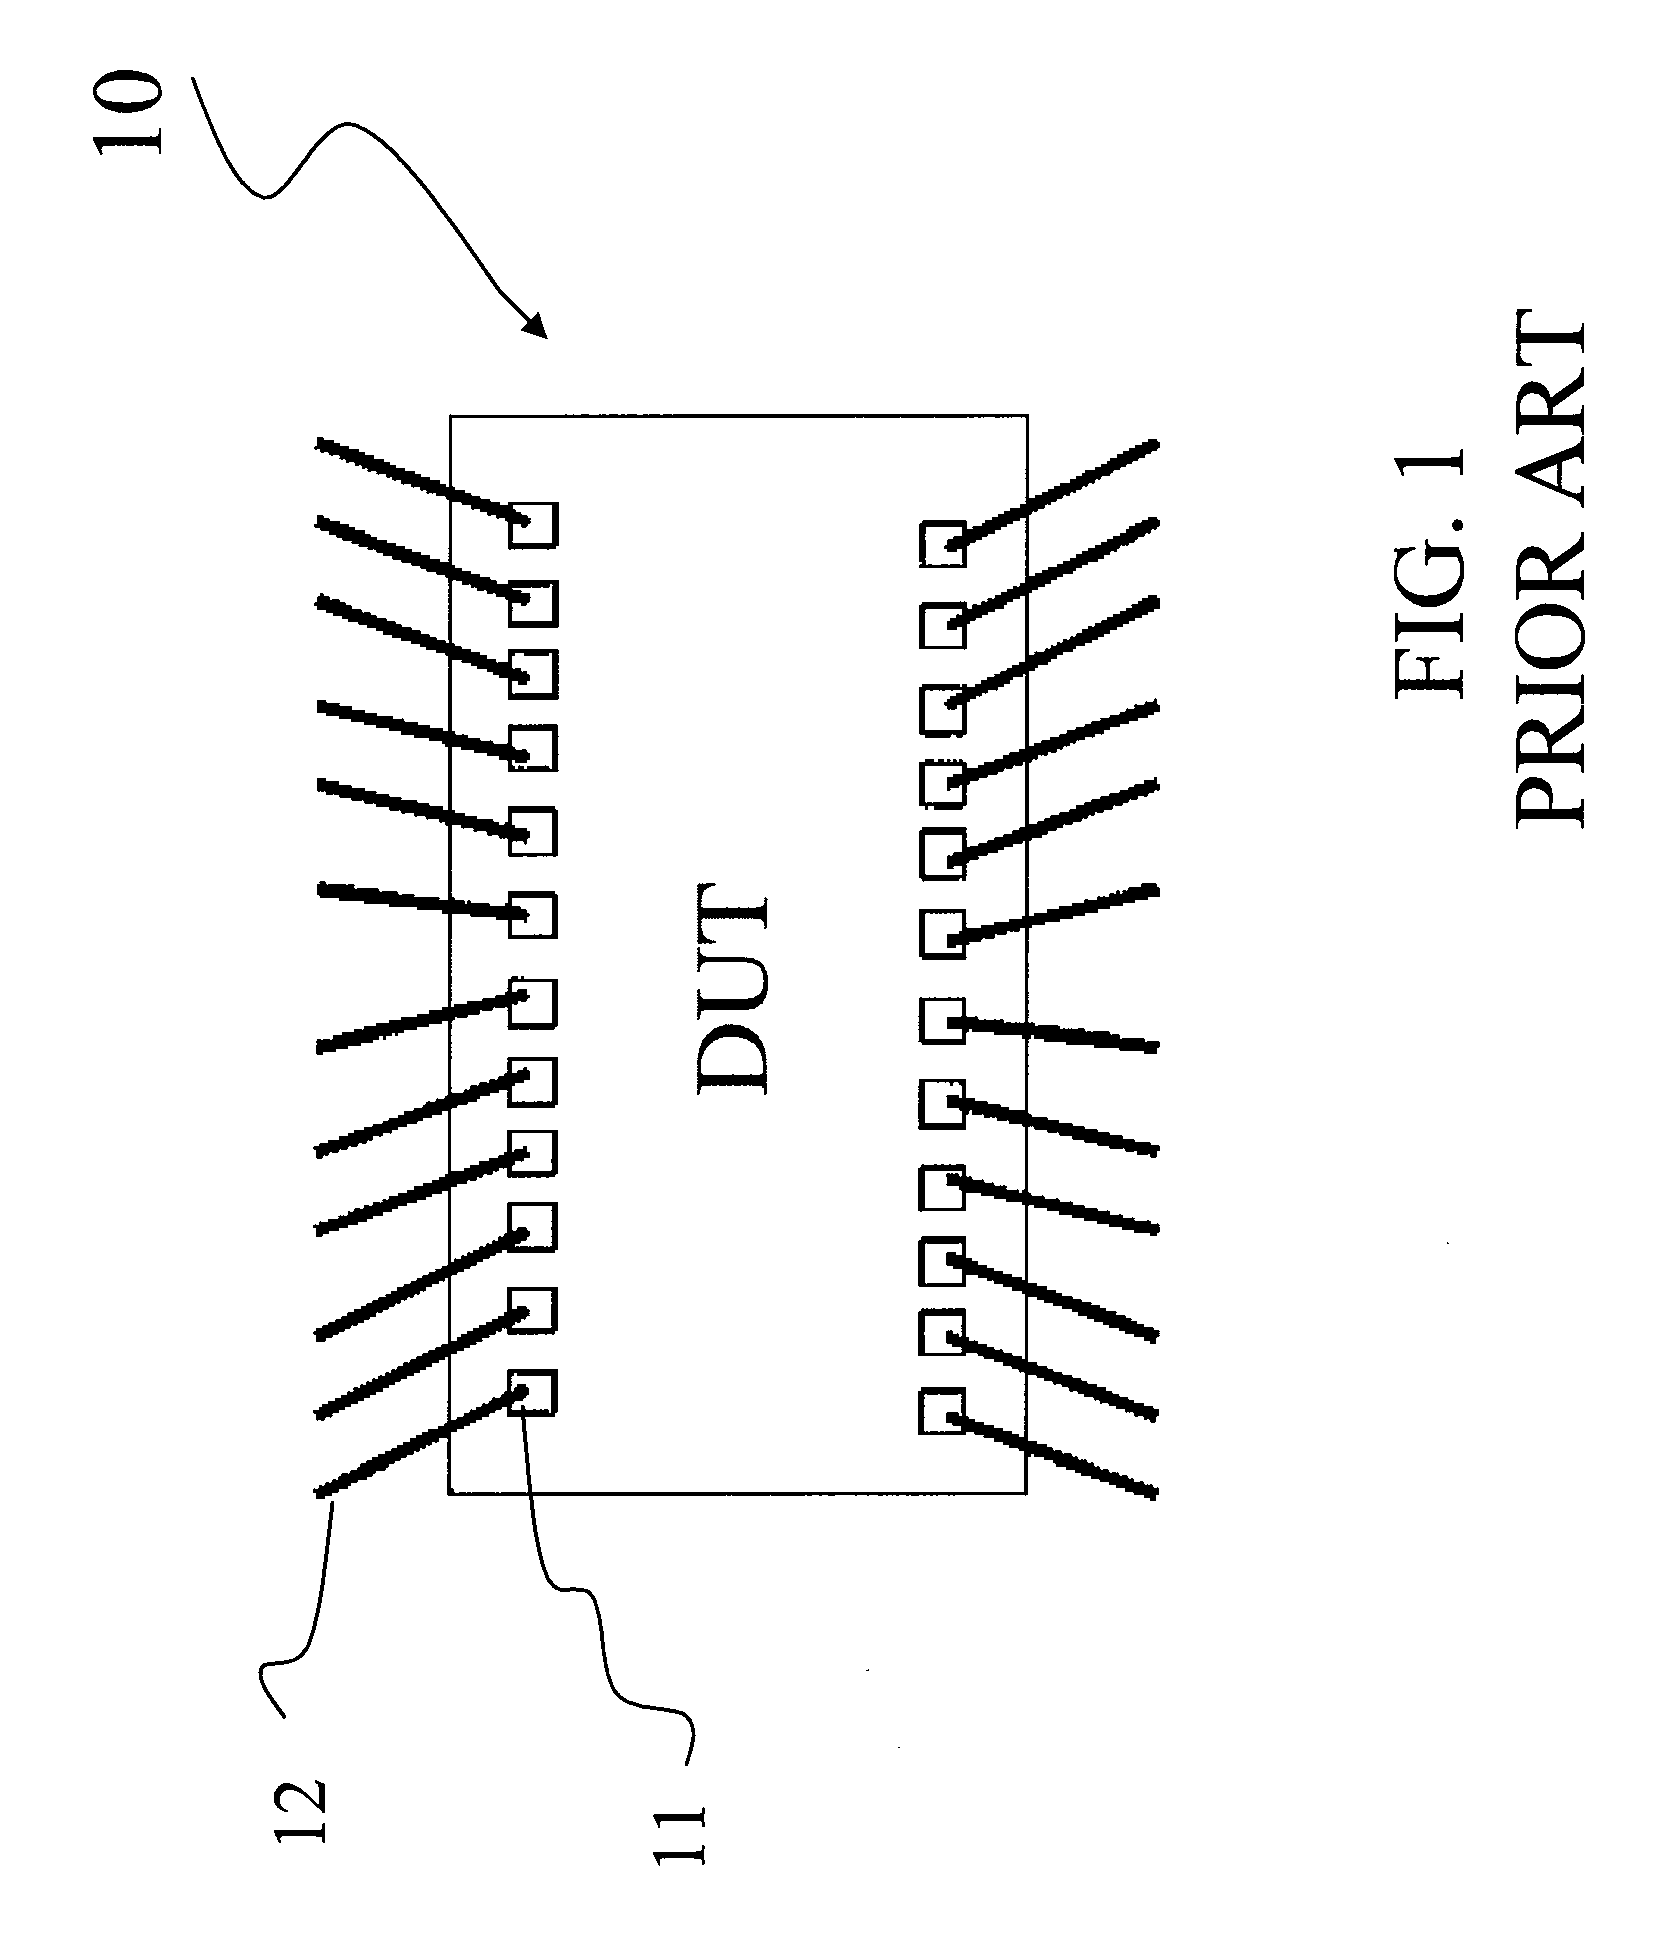 Method for performing an electrical testing of electronic devices